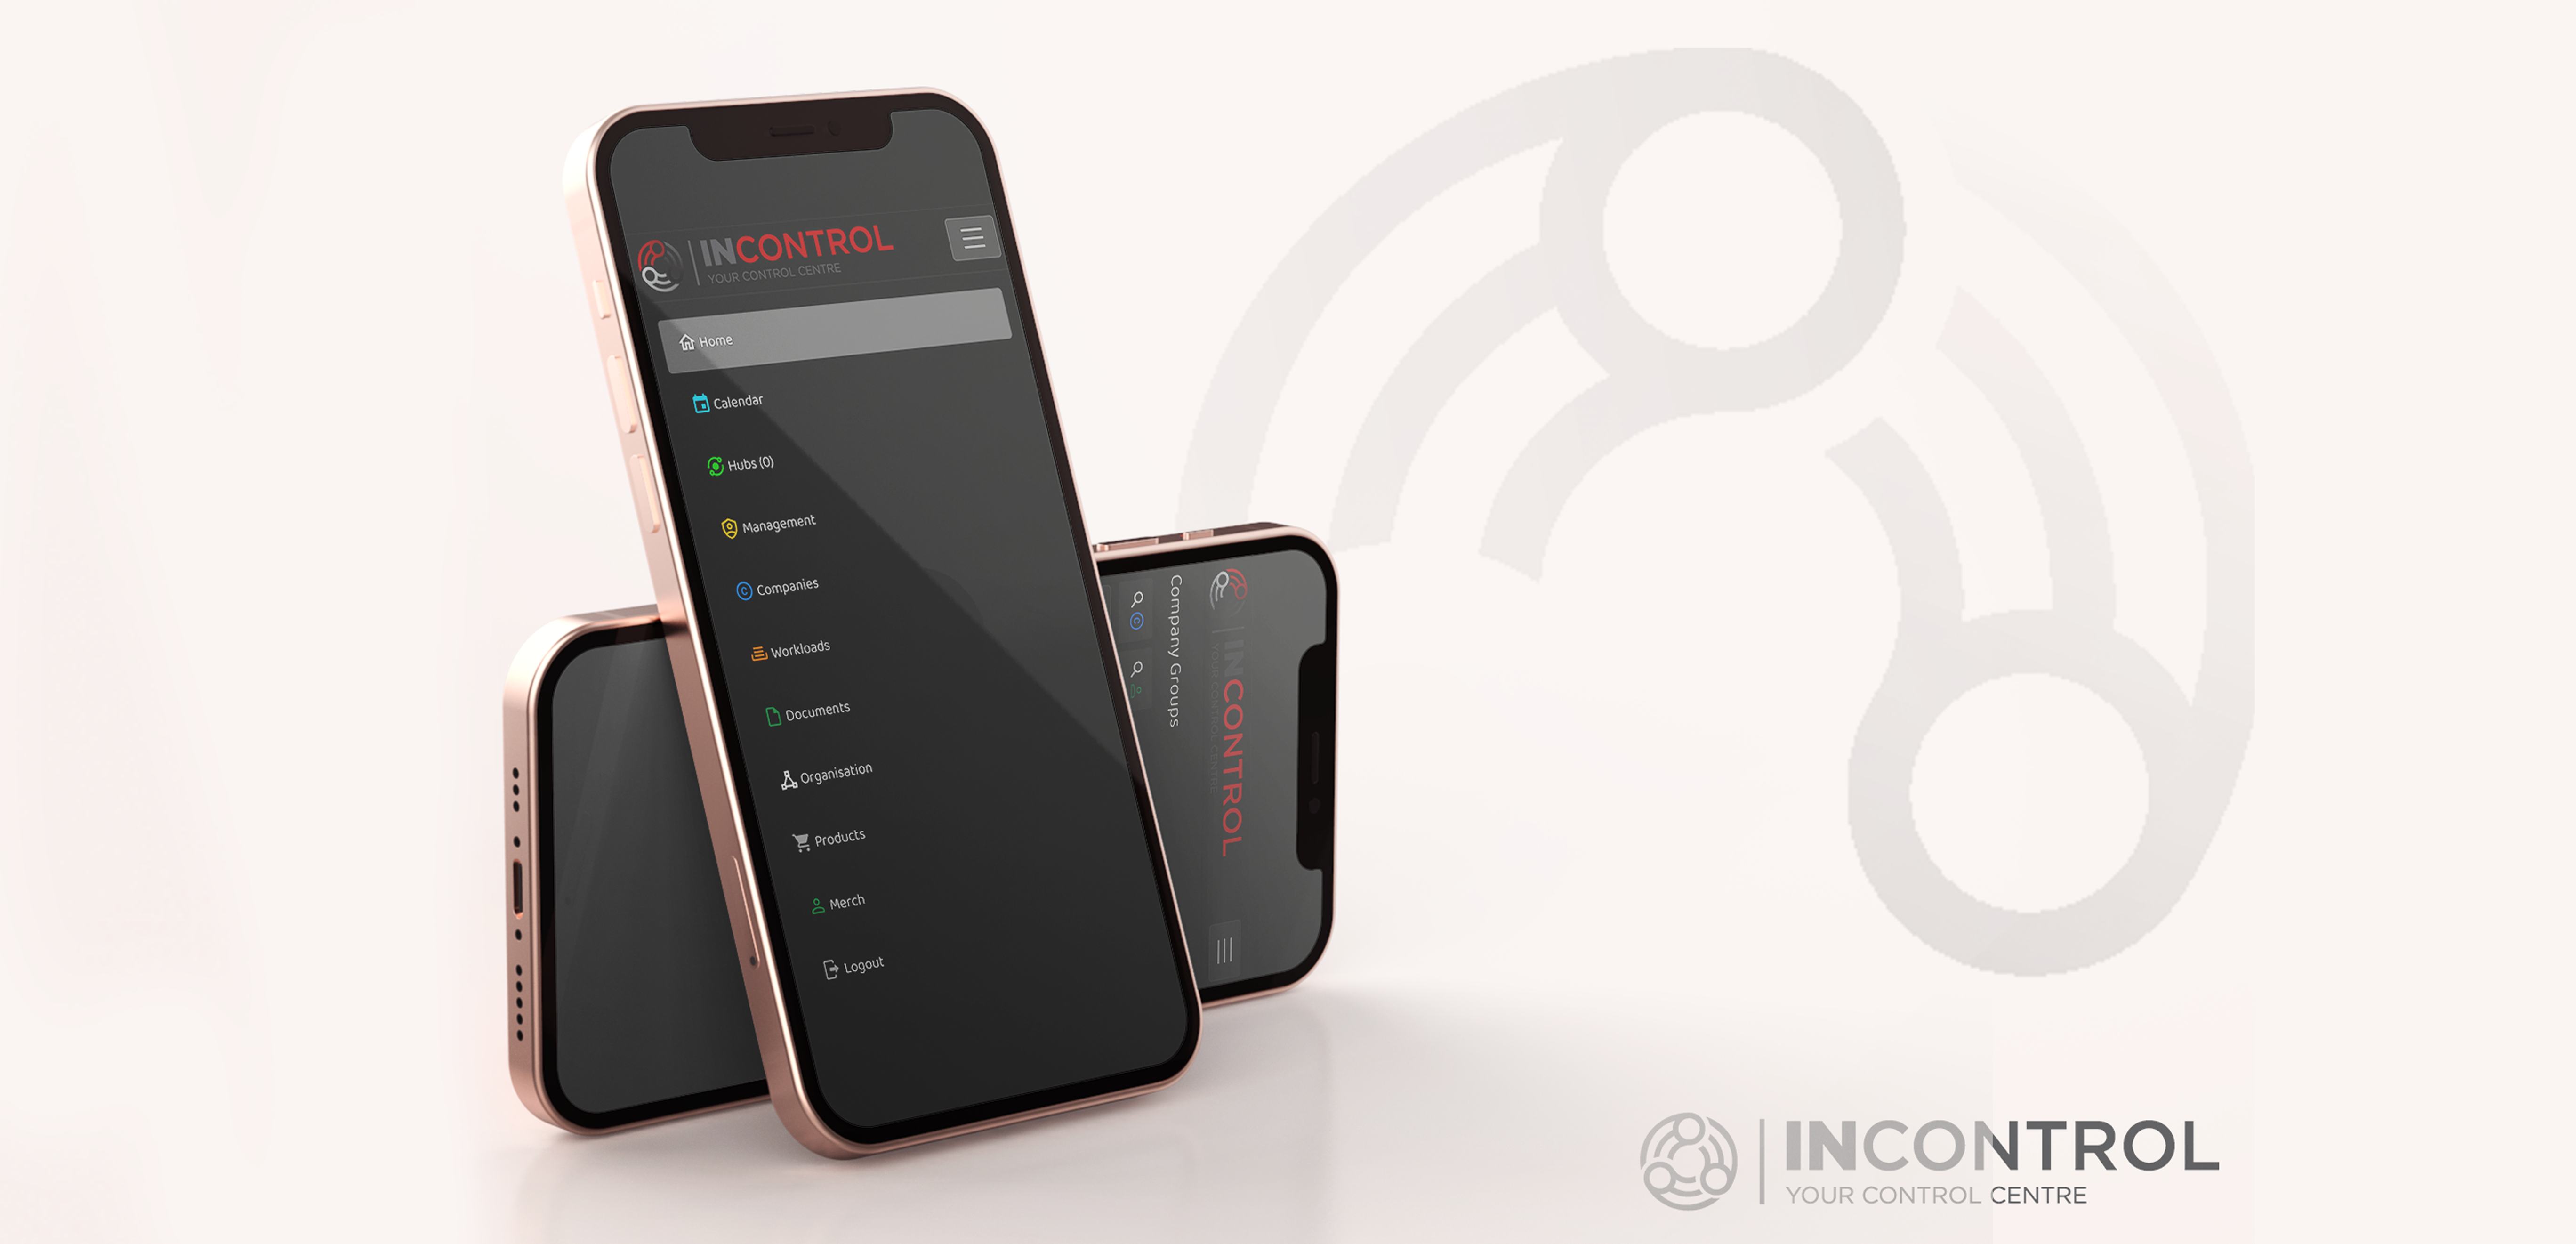 INControl can be used on any device with an internet connection